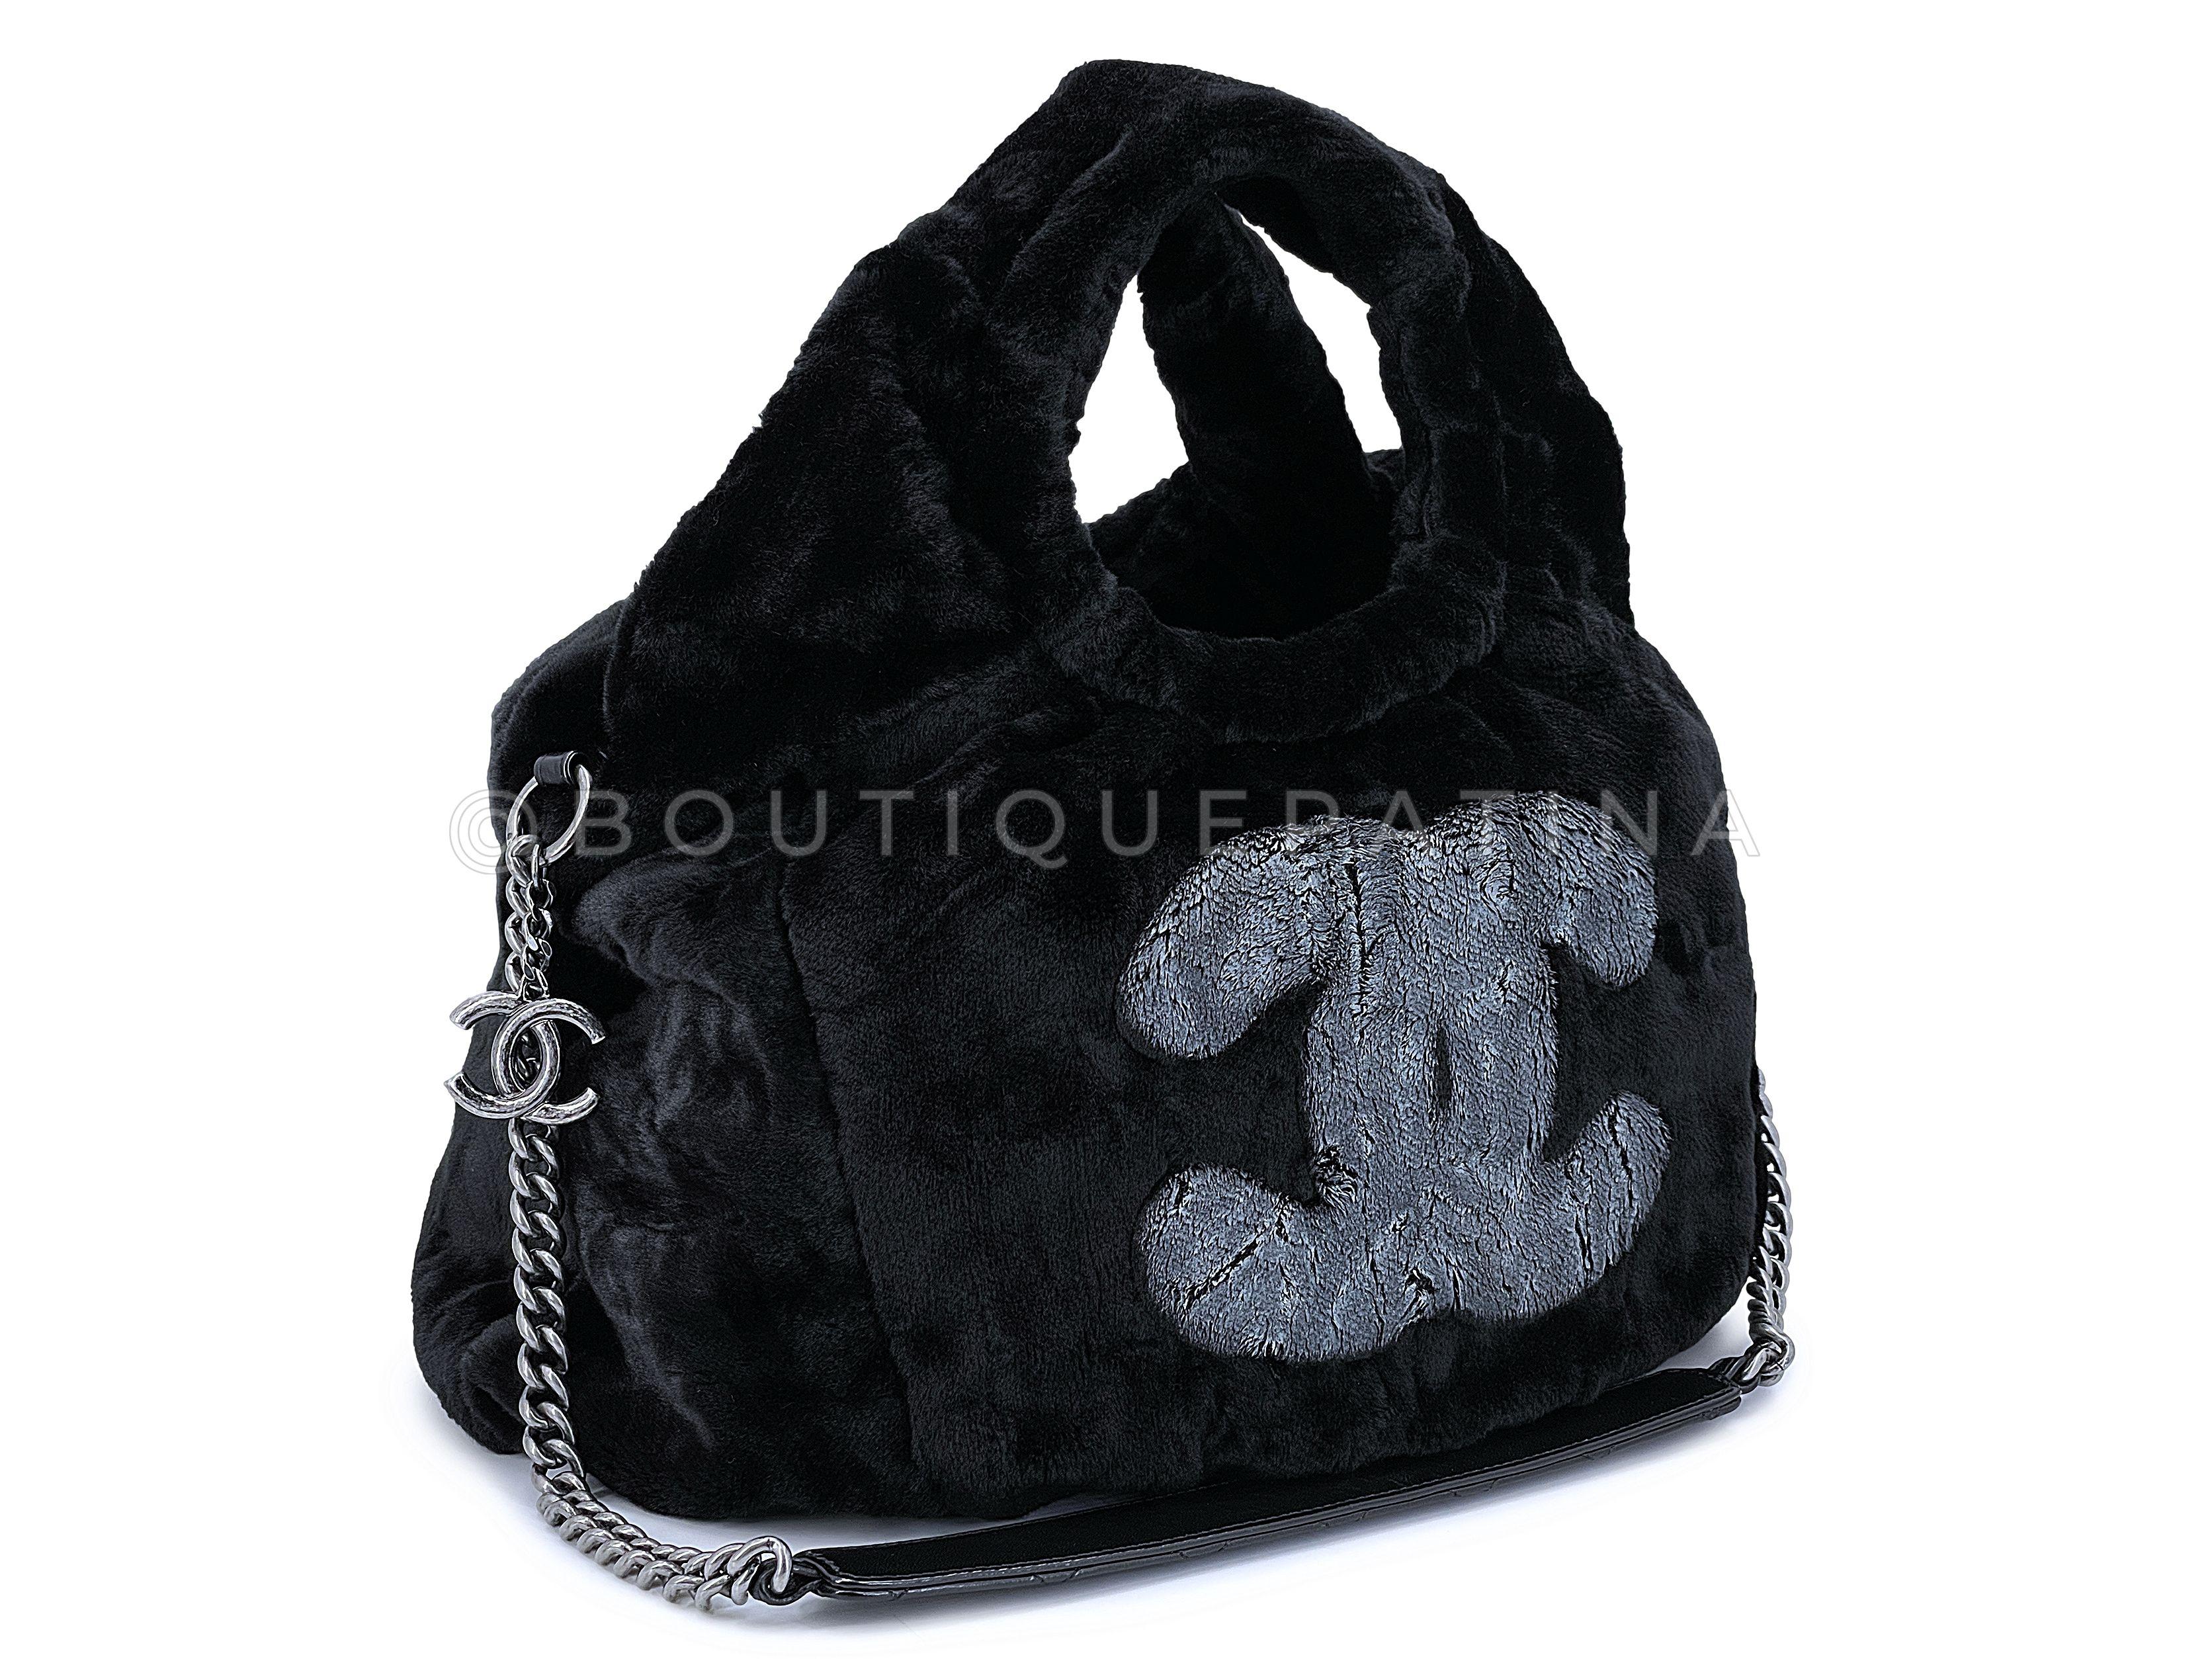 Store item: 67704
Rare Chanel 2010 Black Logo Fur Hobo Tote Bag SHW is a versatile hobo tote in faux fur and bold logos on front and back.

Oversized 